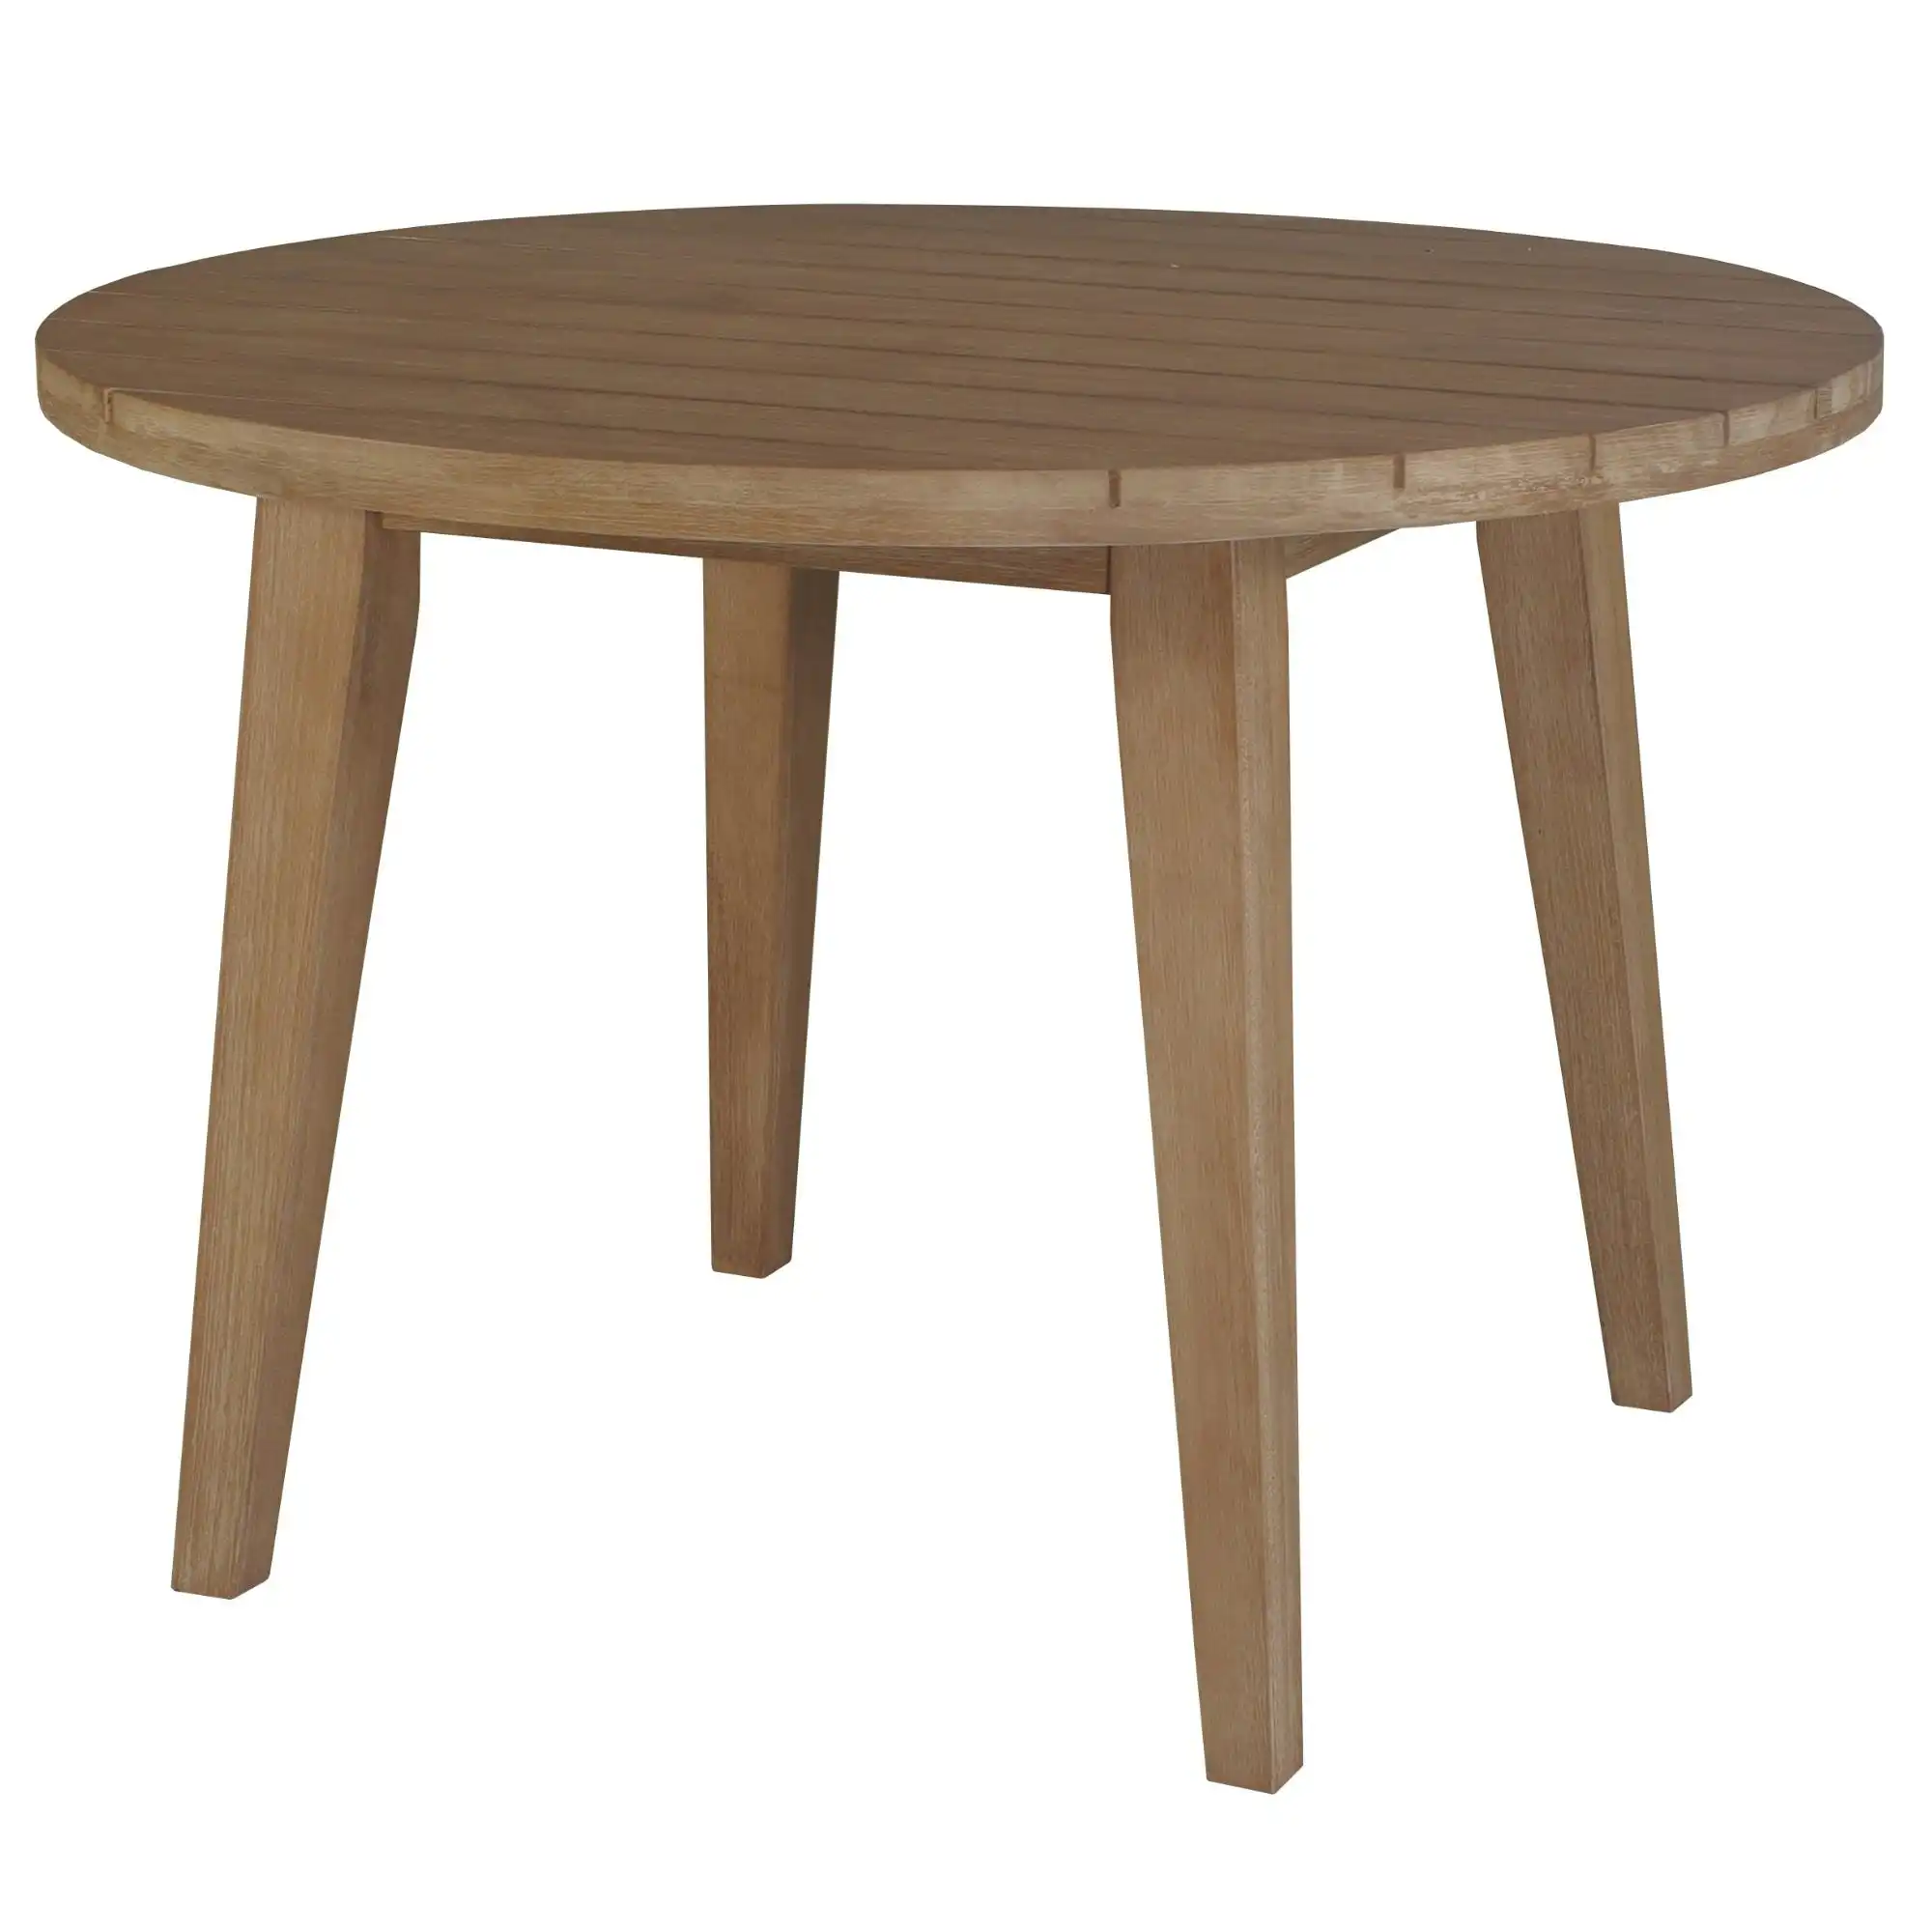 Stud 110cm Outdoor Round Dining Table